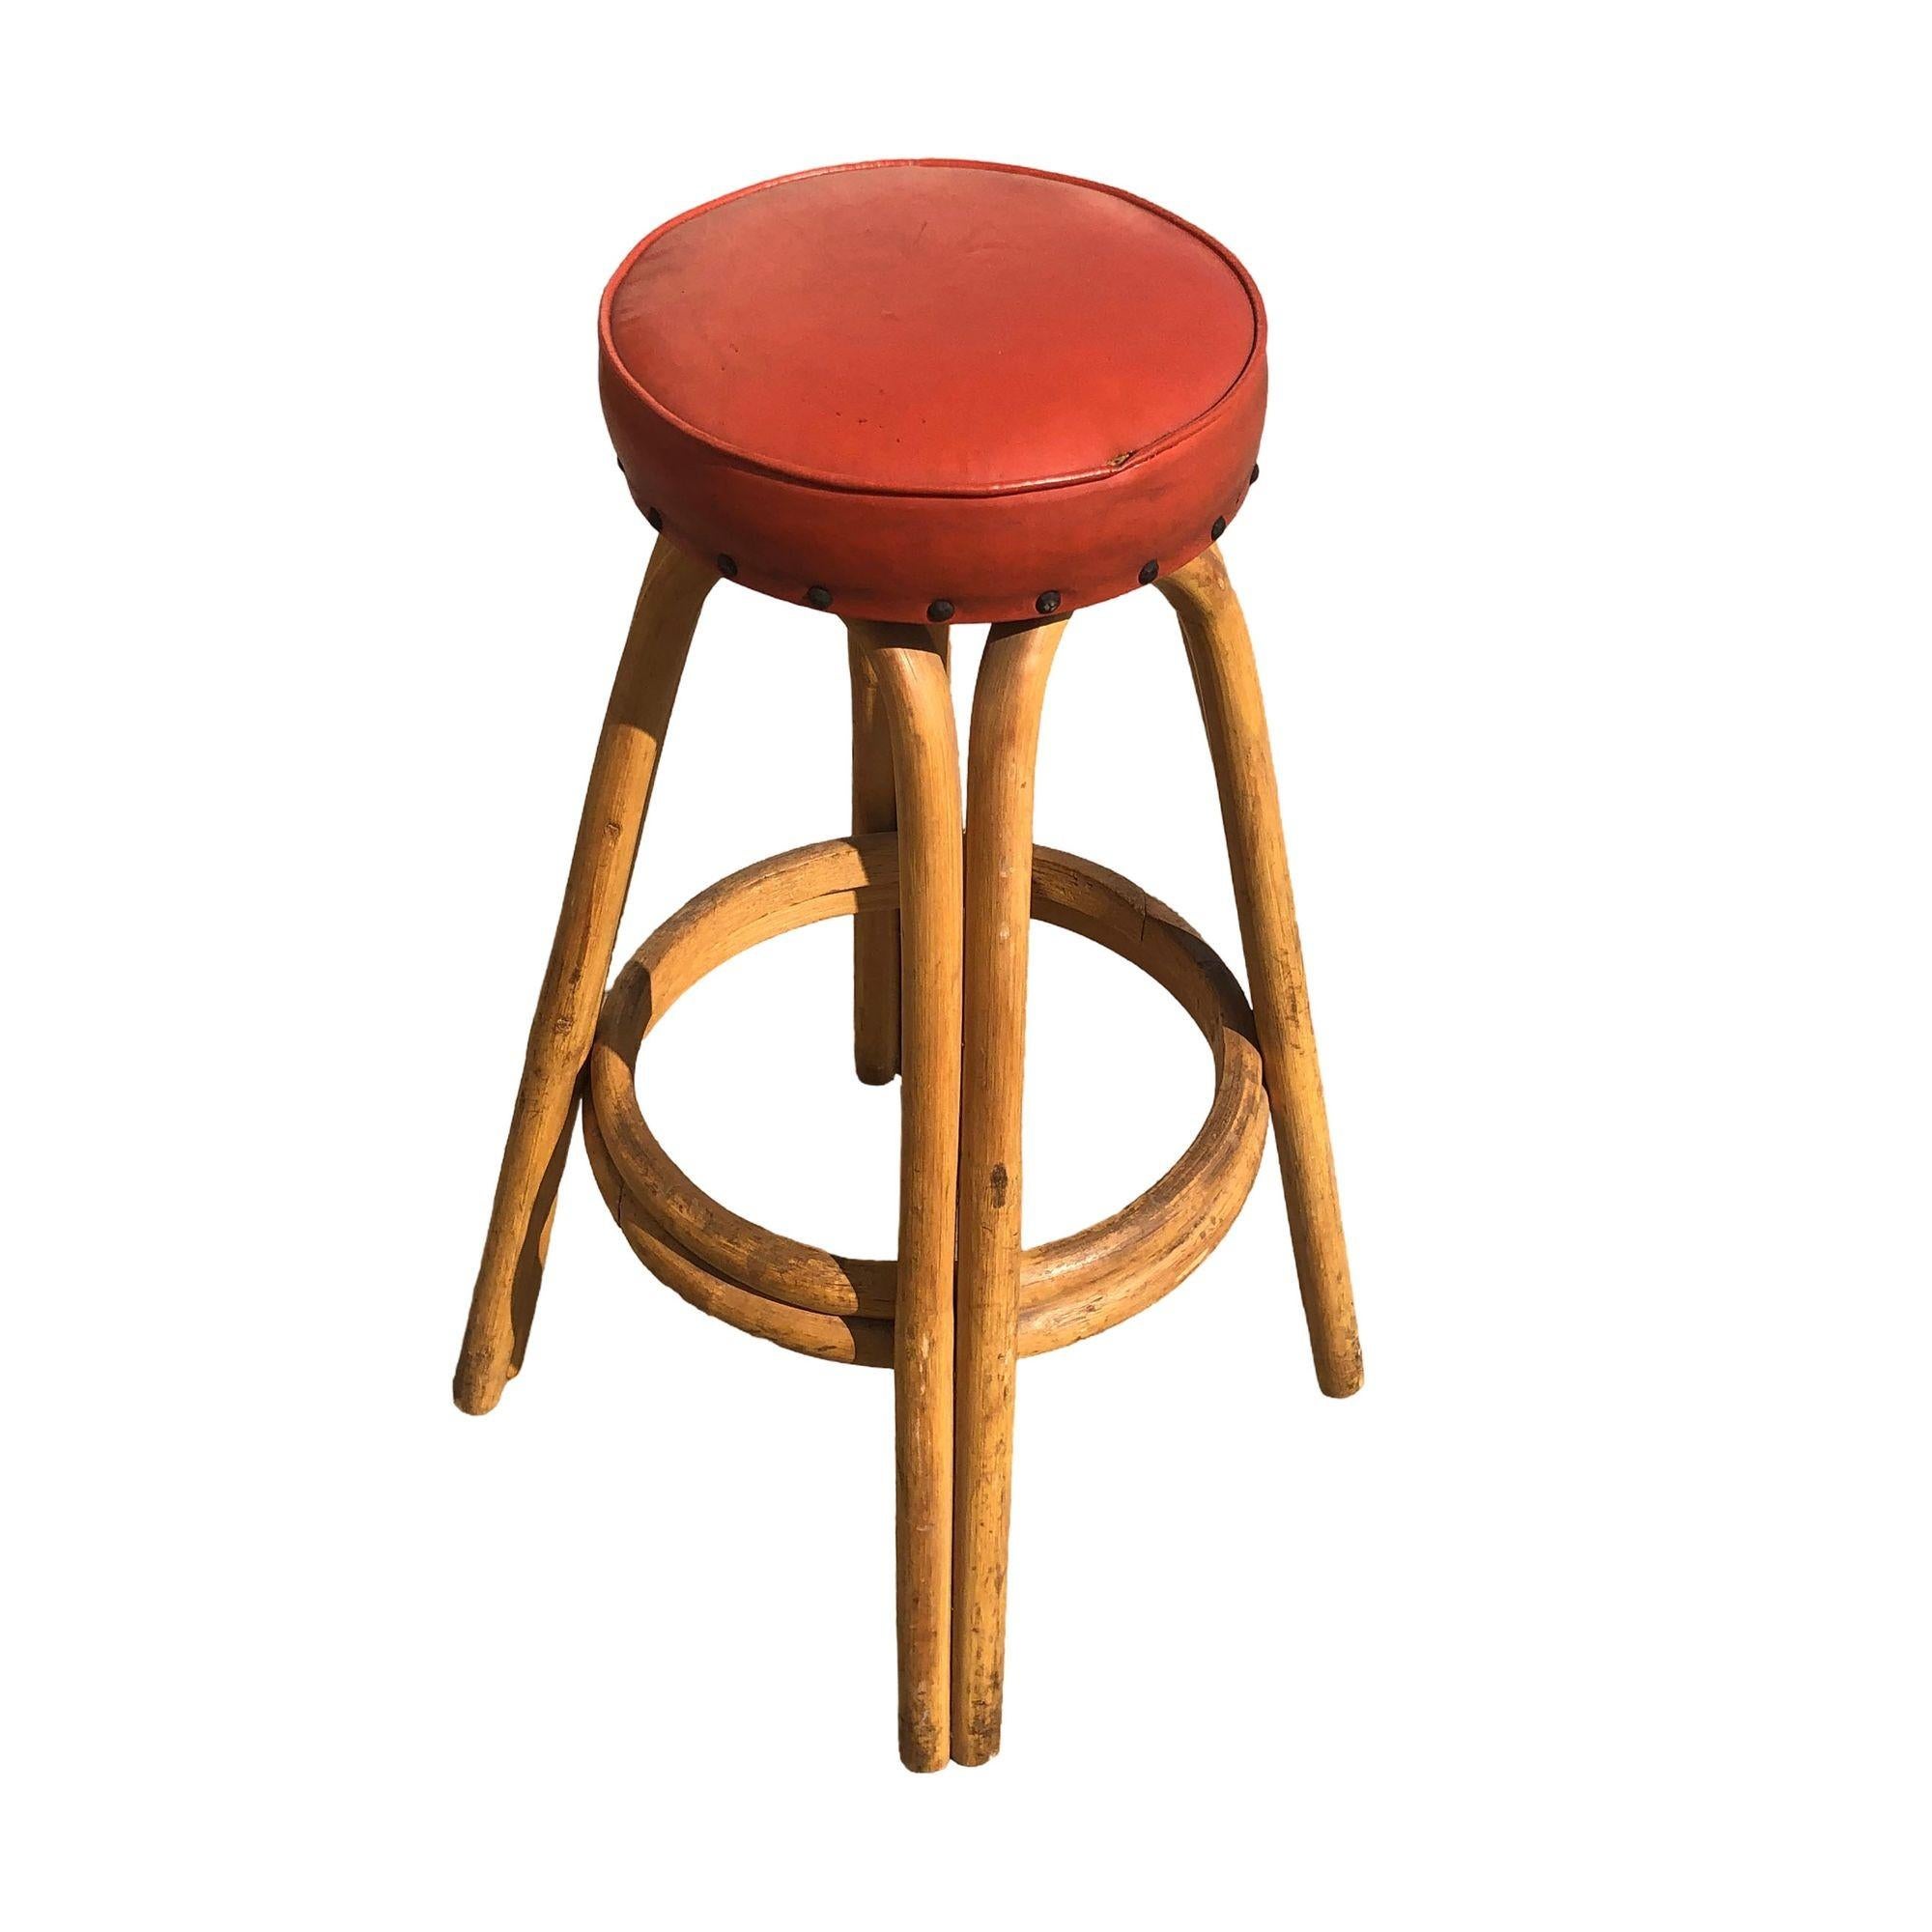 Elevate your space with this set of five restored Mid-century arched rattan bar stools, each adorned with striking studded red cushions. Crafted with arches on each side of the stool and two-stranded legs, this piece combines Mid-century era styling